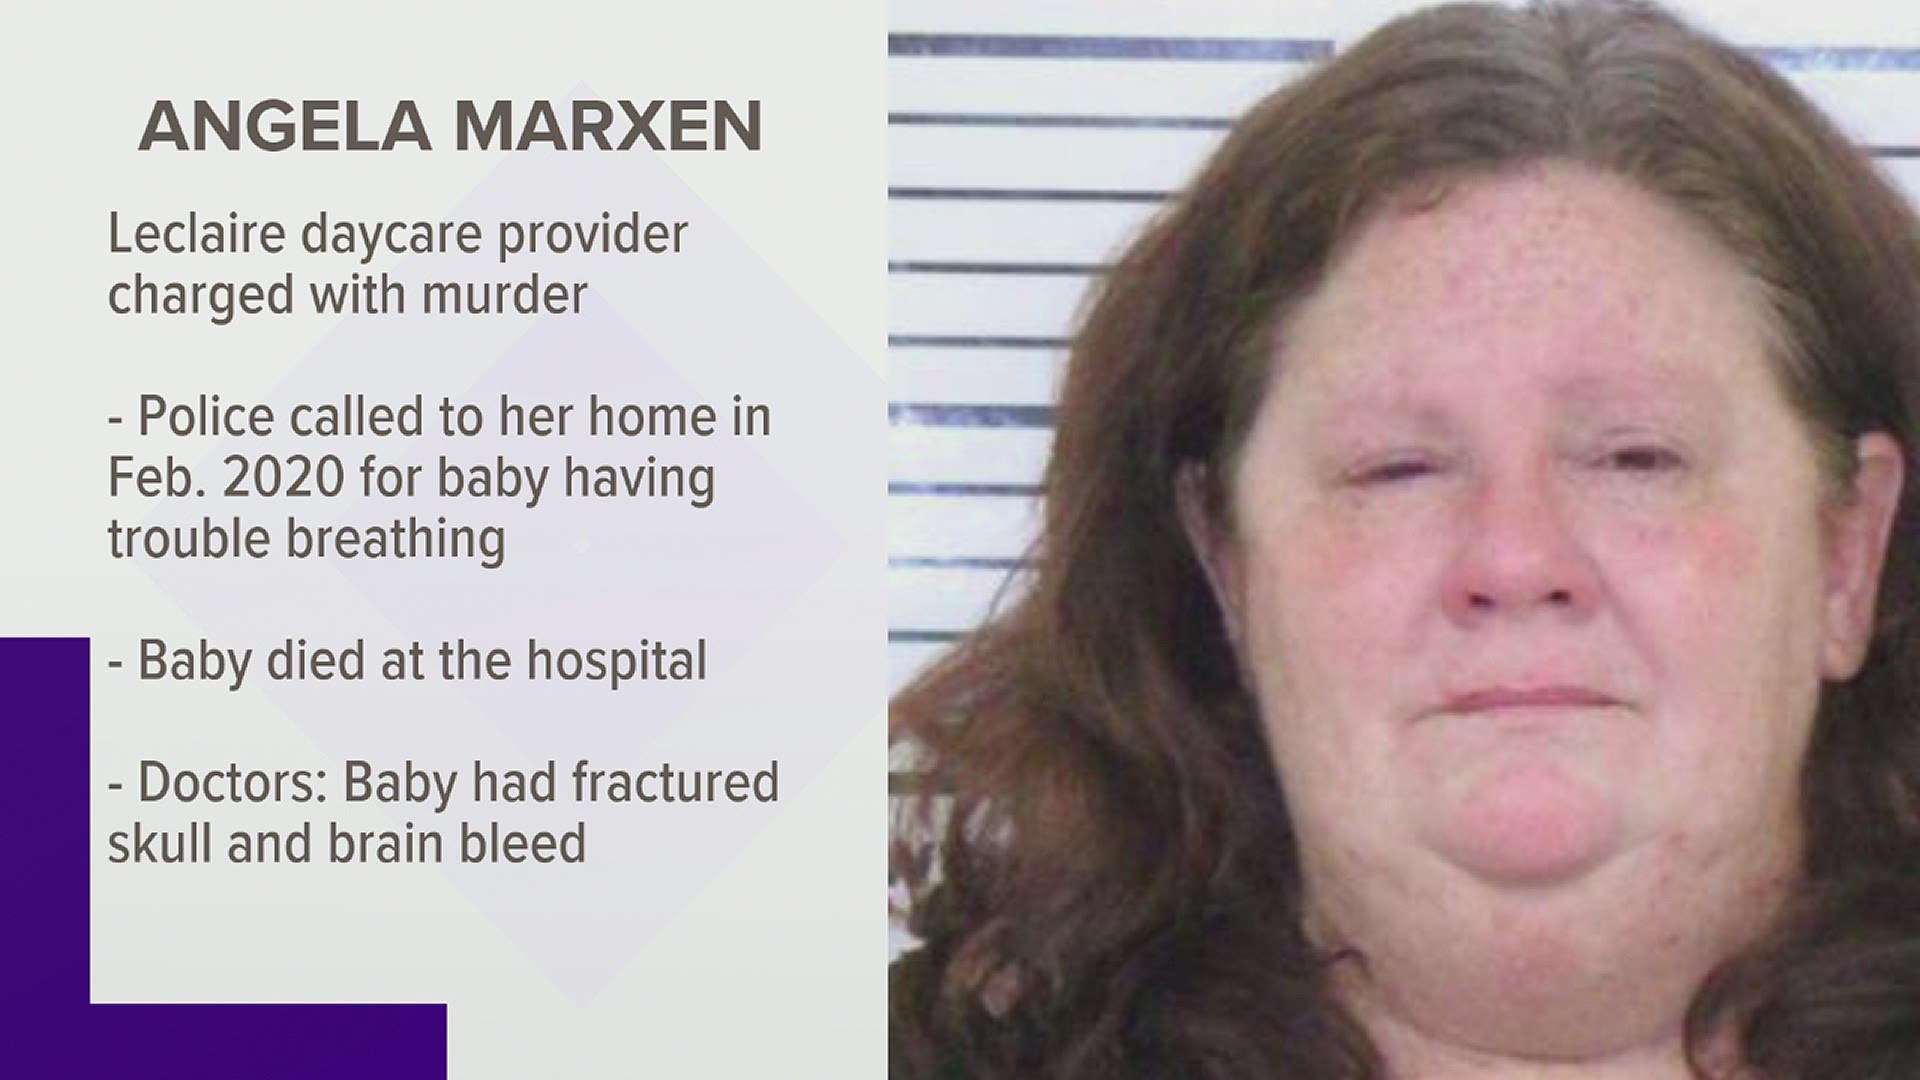 LeClaire Police arrested Angela Marxen, an in-home day care provider of Murder of the infant girl who was found unresponsive February 5, 2020.